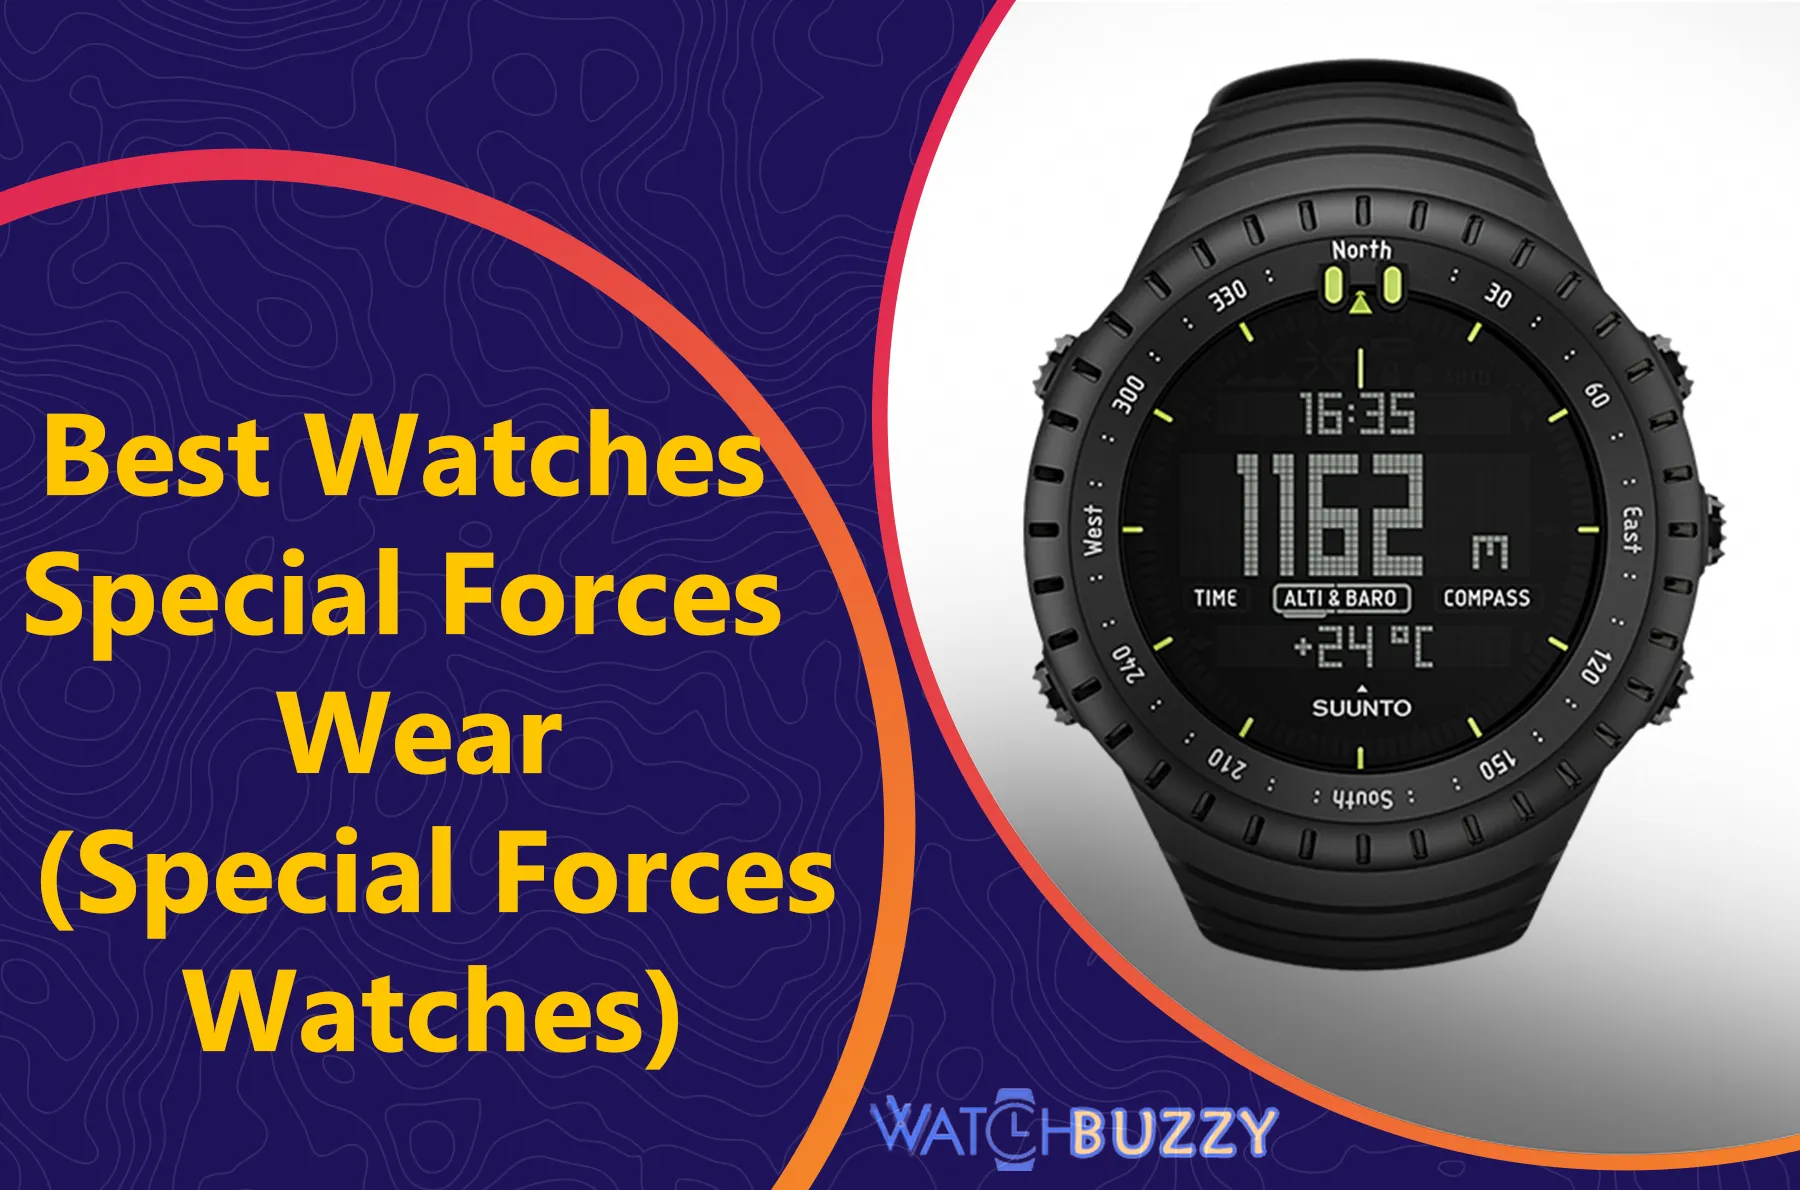 Best Watches Special Forces Wear (Special Forces Watches)